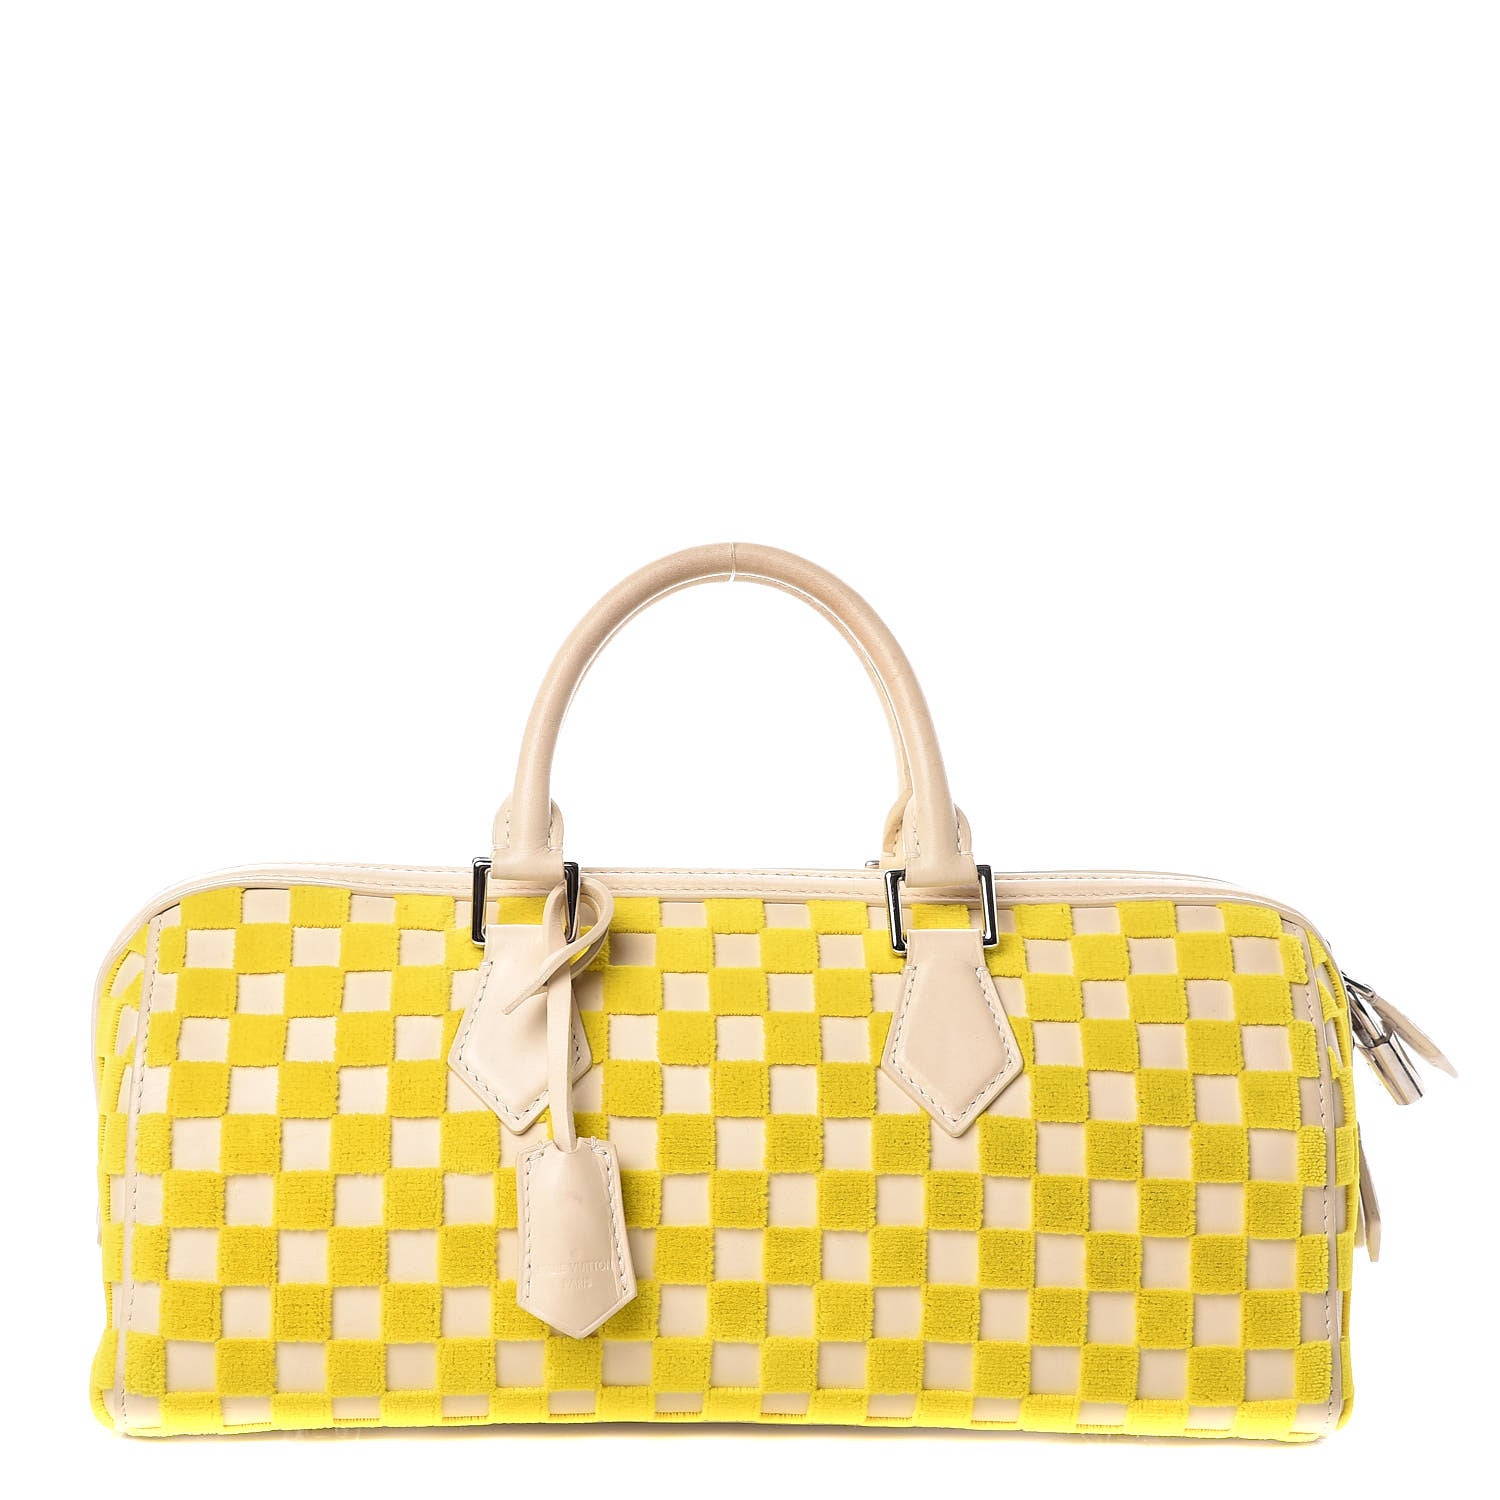 LOUIS VUITTON Women's Malesherbes Leather in Yellow